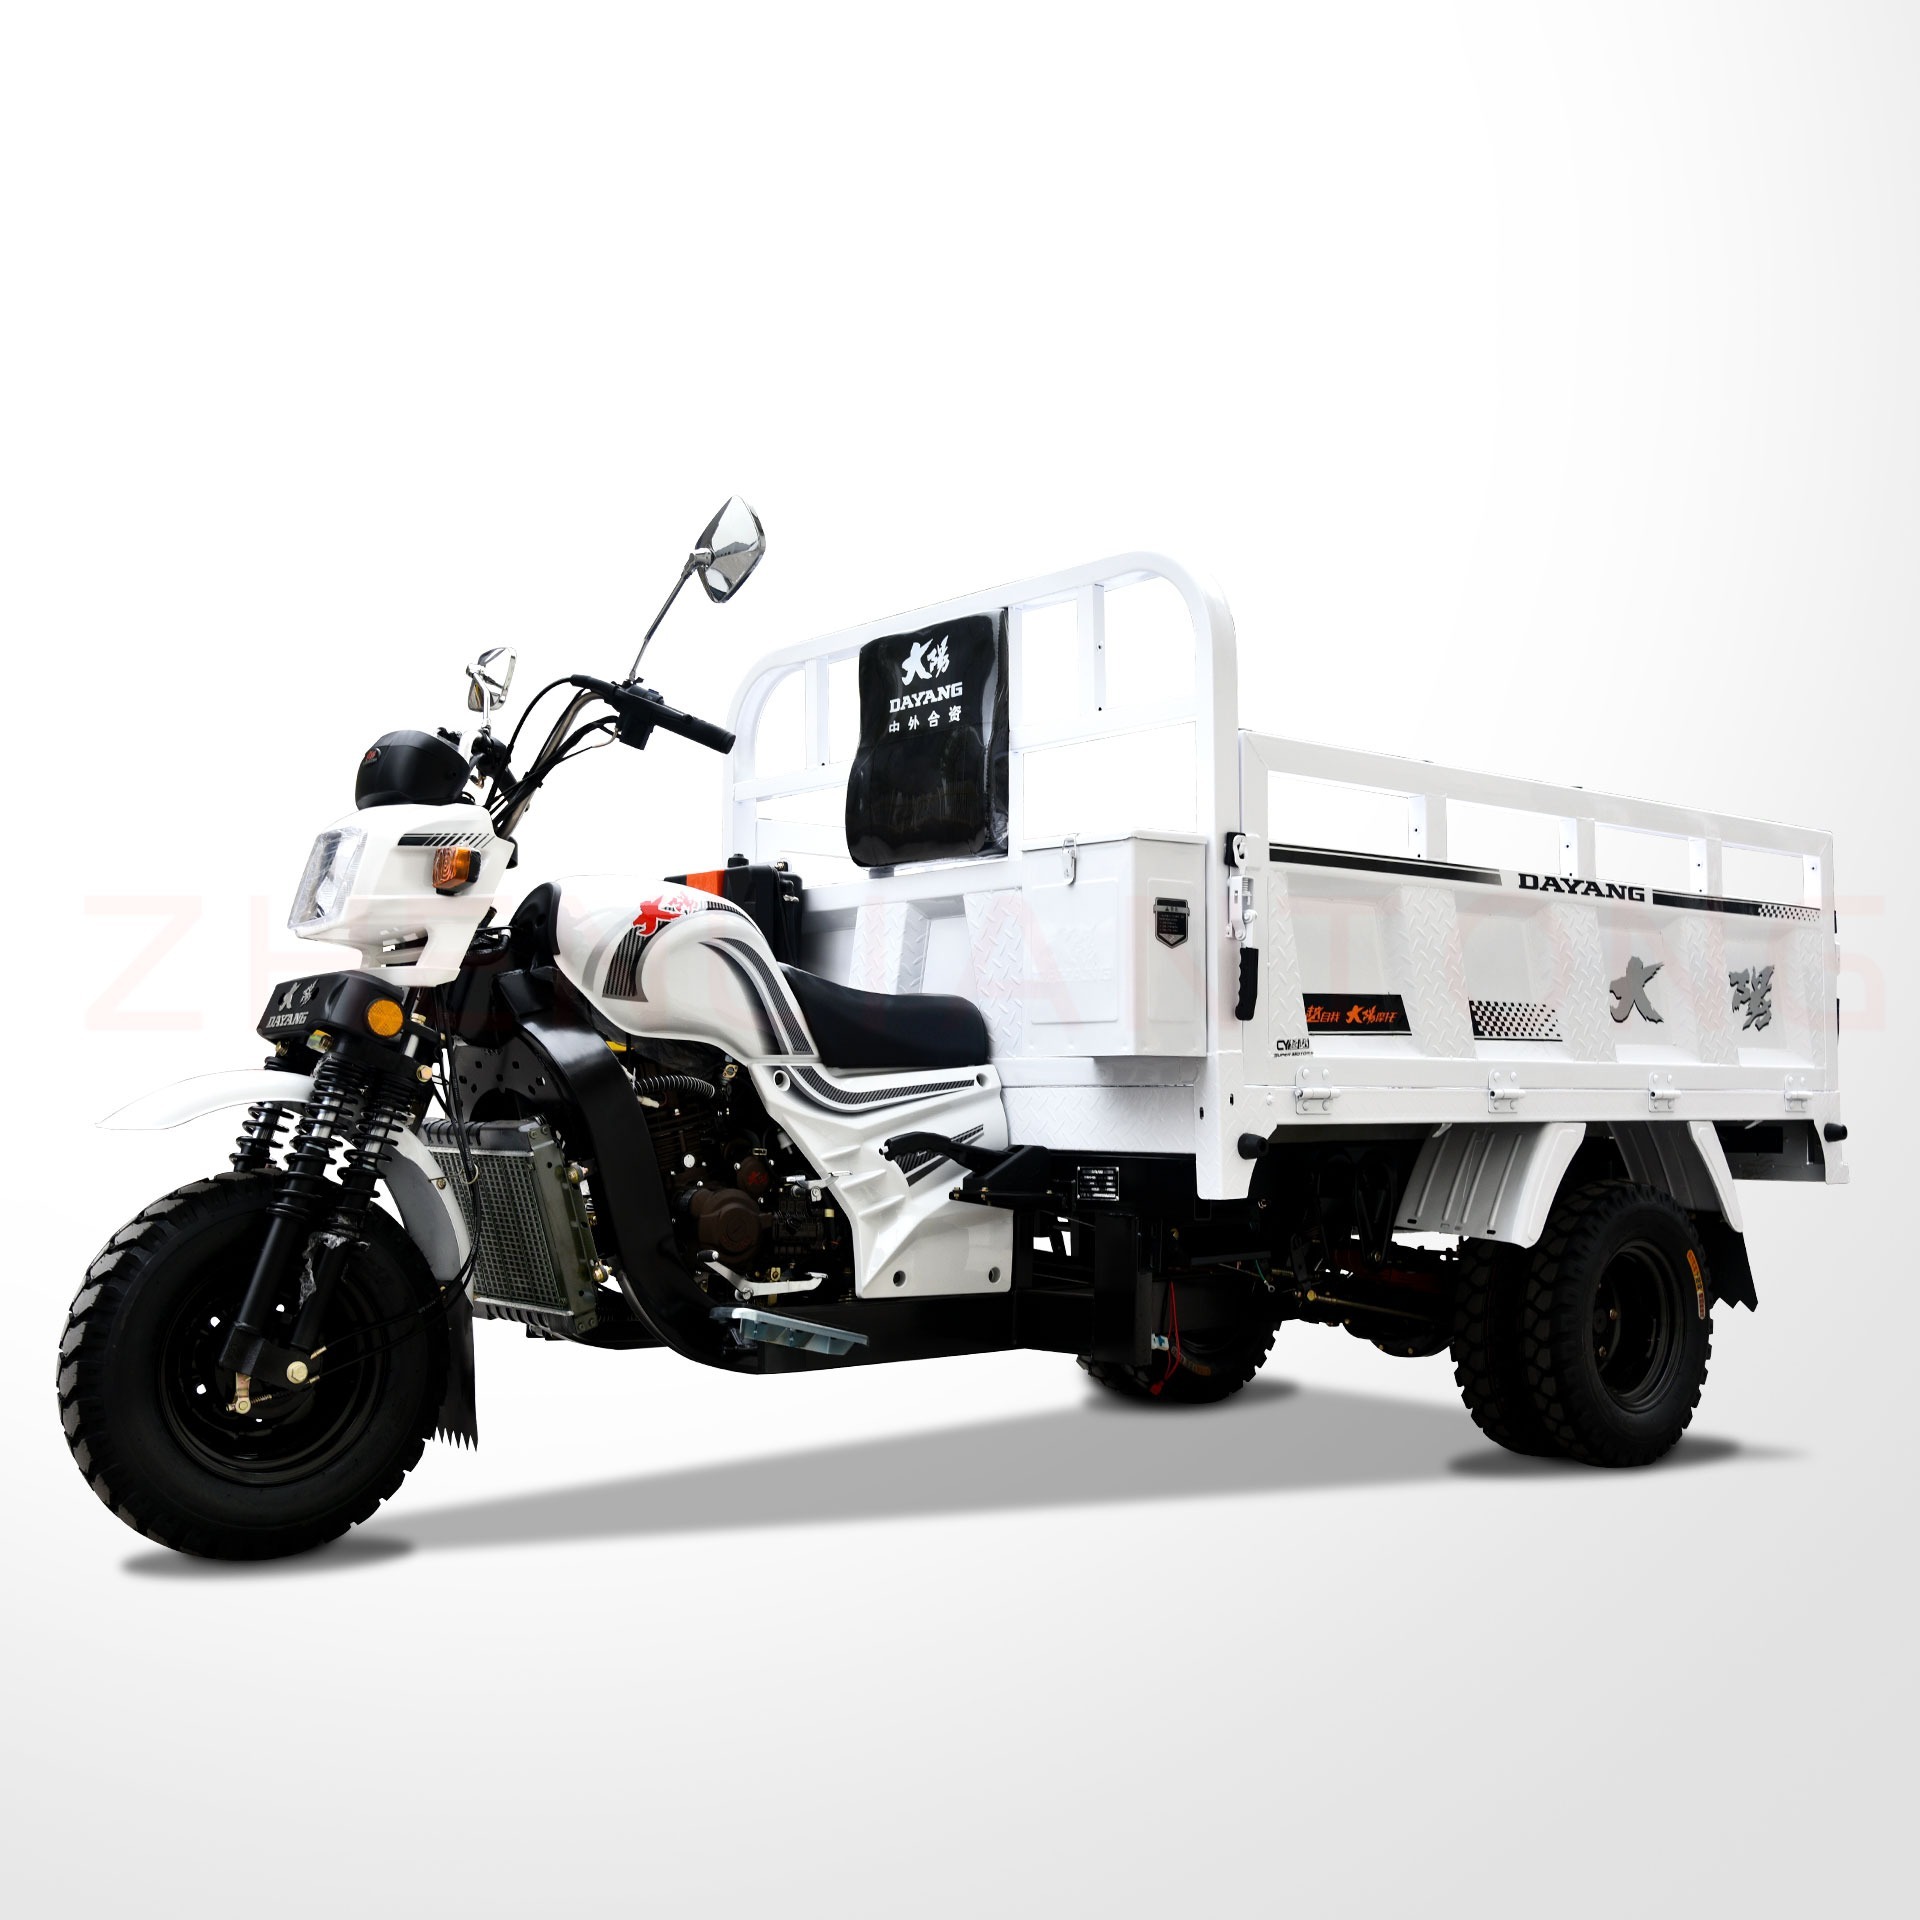 Beiyi DAYANG Brand for Sale China hot sale Motorized Tricycles Cargo Tricycles Engine 150cc175cc 200cc Tricycles For Adult